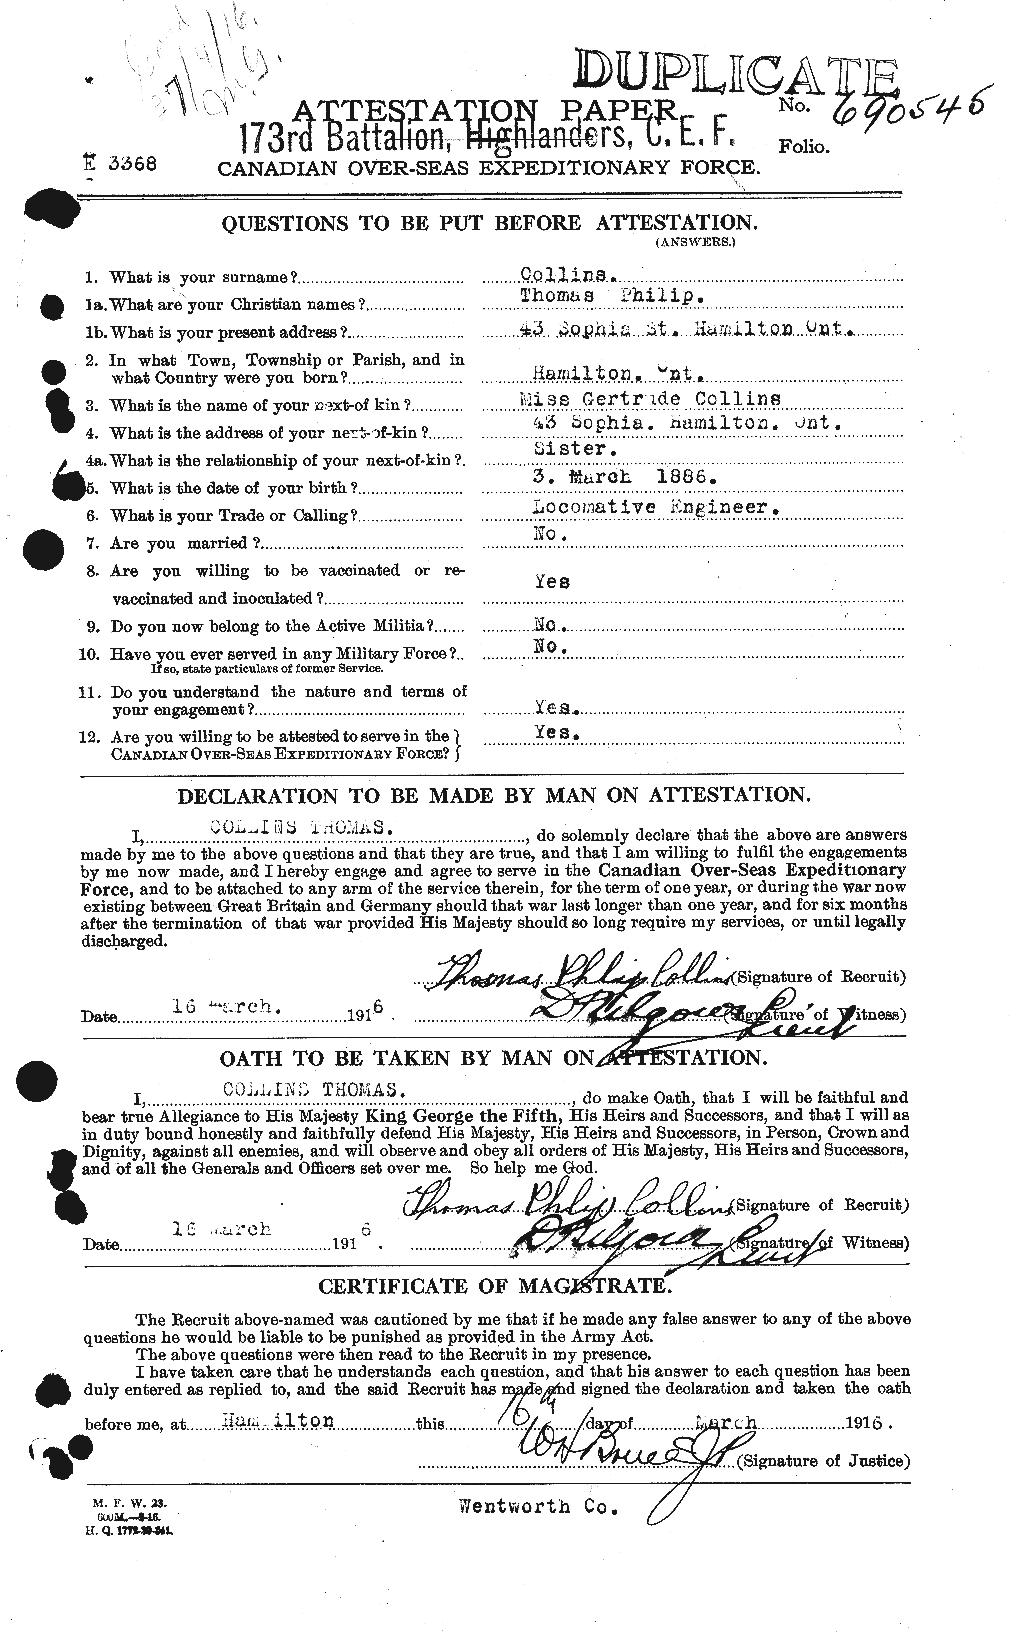 Personnel Records of the First World War - CEF 069121a